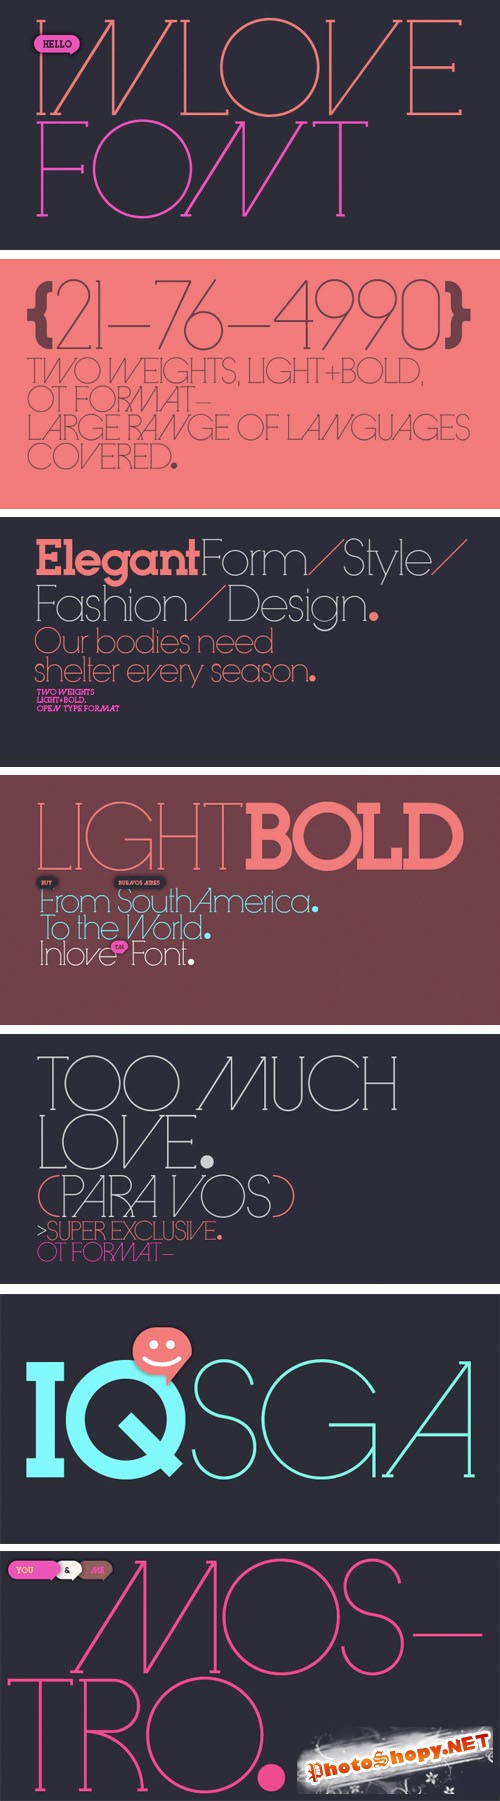 Inlove Font Family